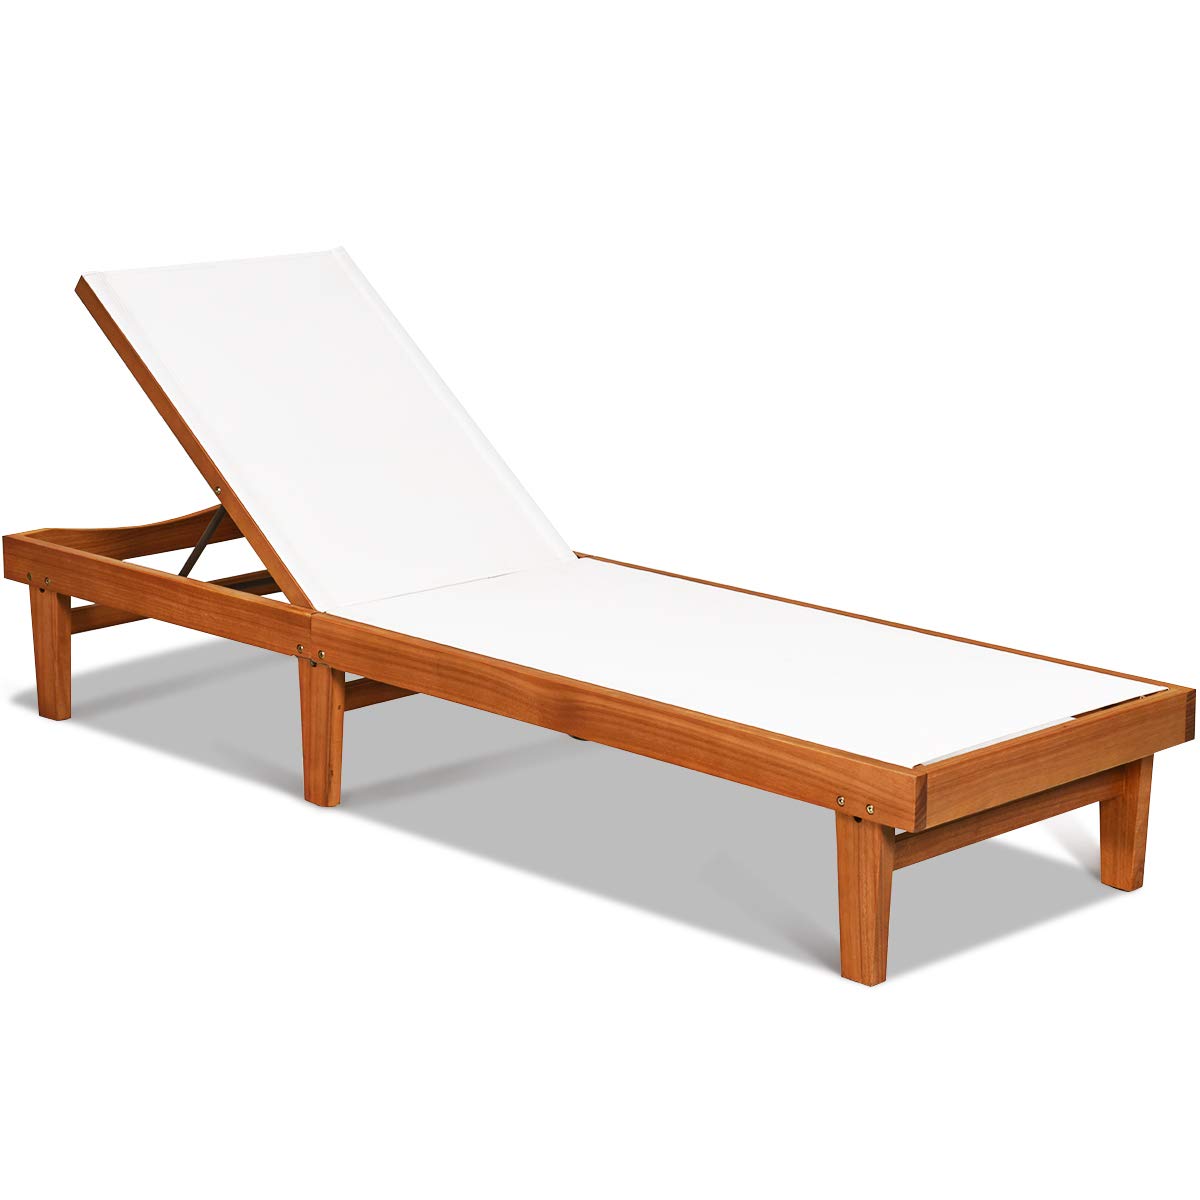 2, White Patio Chaise Lounger with Adjustable Back Eucalyptus Wood Reclining Lounge Chair with Breathable Fabric for Poolside Lawn Backyard Tangkula Outdoor Wood Chaise Lounge Chair 